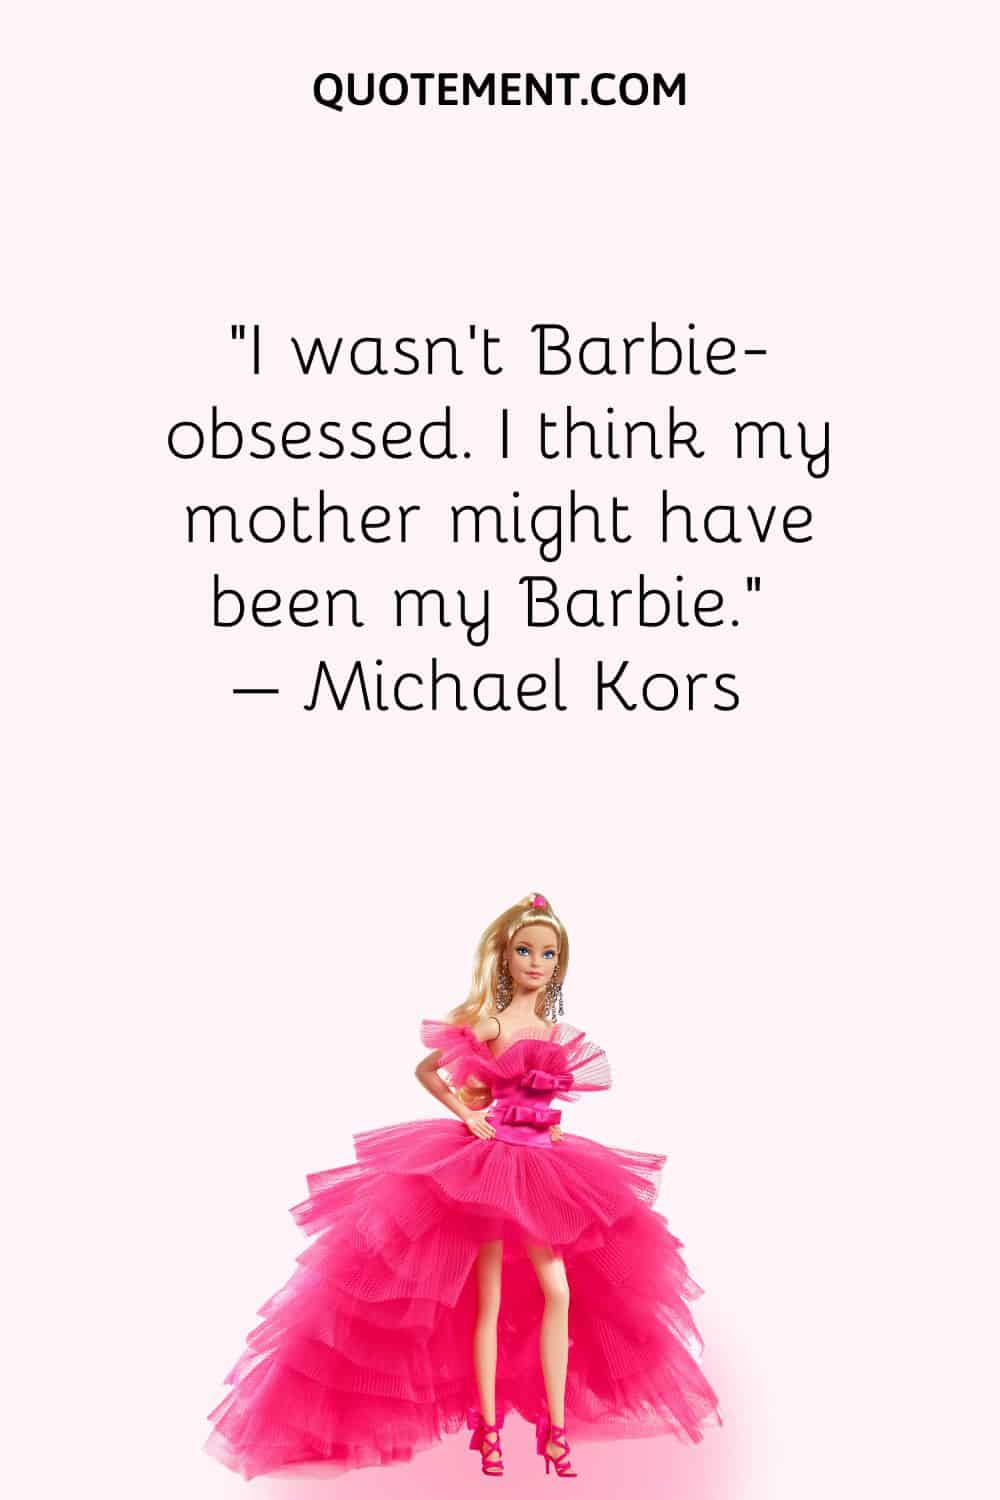 I wasn't Barbie-obsessed. I think my mother might have been my Barbie